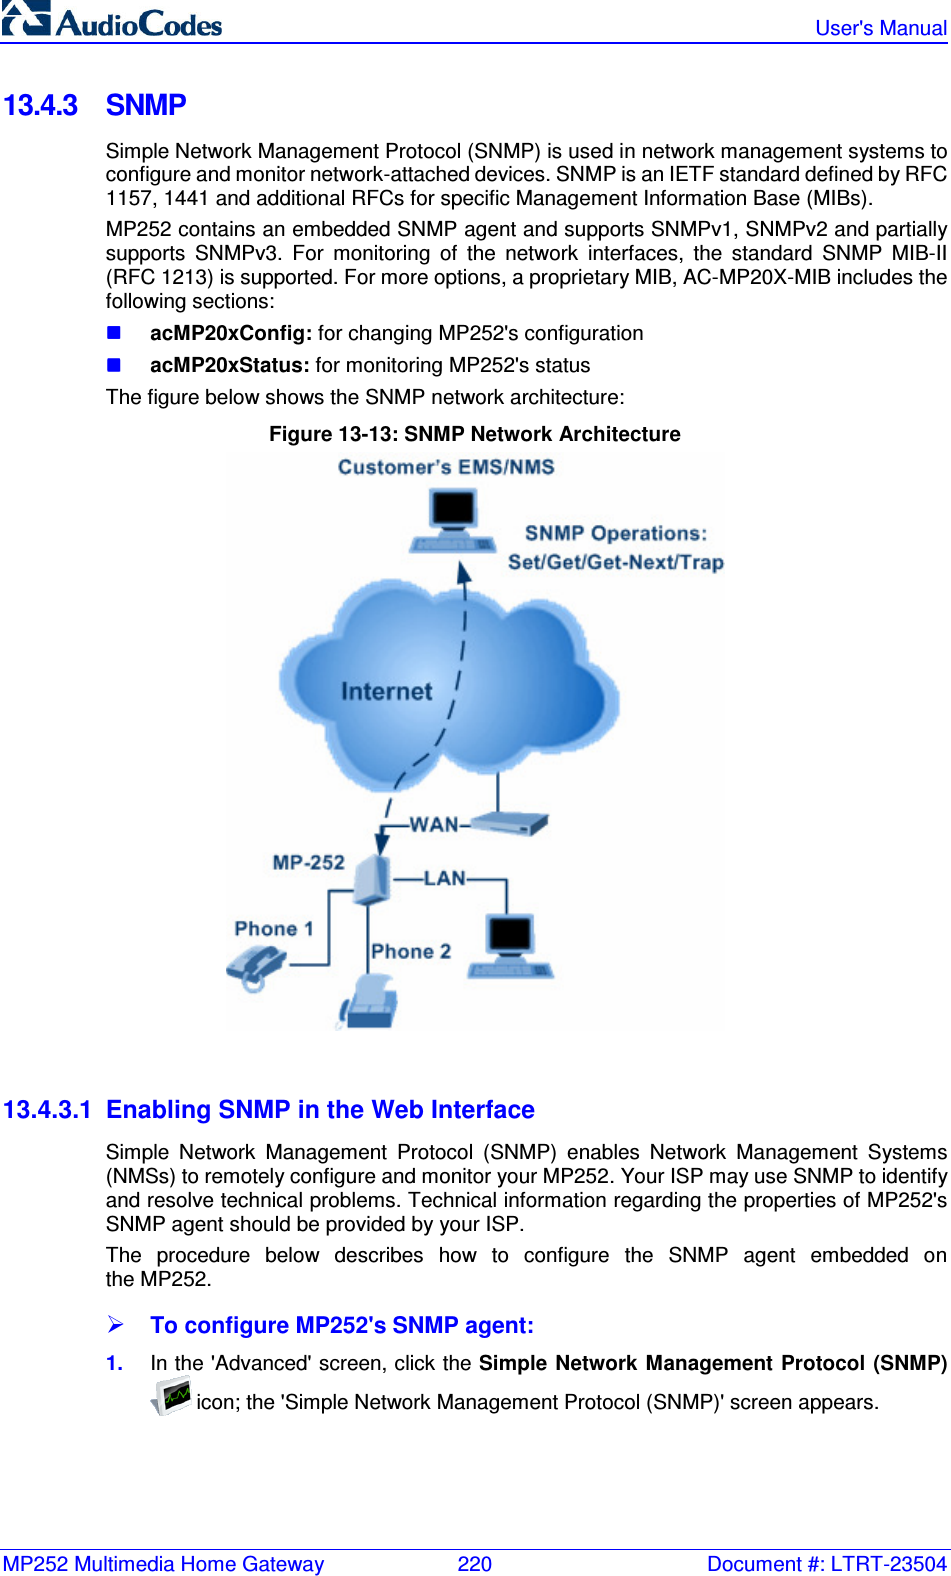 MP252 Multimedia Home Gateway  220  Document #: LTRT-23504   User&apos;s Manual  13.4.3  SNMP Simple Network Management Protocol (SNMP) is used in network management systems to configure and monitor network-attached devices. SNMP is an IETF standard defined by RFC 1157, 1441 and additional RFCs for specific Management Information Base (MIBs). MP252 contains an embedded SNMP agent and supports SNMPv1, SNMPv2 and partially supports  SNMPv3.  For  monitoring  of  the  network  interfaces,  the  standard  SNMP  MIB-II (RFC 1213) is supported. For more options, a proprietary MIB, AC-MP20X-MIB includes the following sections:  acMP20xConfig: for changing MP252&apos;s configuration  acMP20xStatus: for monitoring MP252&apos;s status The figure below shows the SNMP network architecture: Figure 13-13: SNMP Network Architecture   13.4.3.1  Enabling SNMP in the Web Interface Simple  Network  Management  Protocol  (SNMP)  enables  Network  Management  Systems (NMSs) to remotely configure and monitor your MP252. Your ISP may use SNMP to identify and resolve technical problems. Technical information regarding the properties of MP252&apos;s SNMP agent should be provided by your ISP. The  procedure  below  describes  how  to  configure  the  SNMP  agent  embedded  on  the MP252.  To configure MP252&apos;s SNMP agent: 1.  In the &apos;Advanced&apos; screen, click the Simple Network Management Protocol (SNMP)  icon; the &apos;Simple Network Management Protocol (SNMP)&apos; screen appears. 